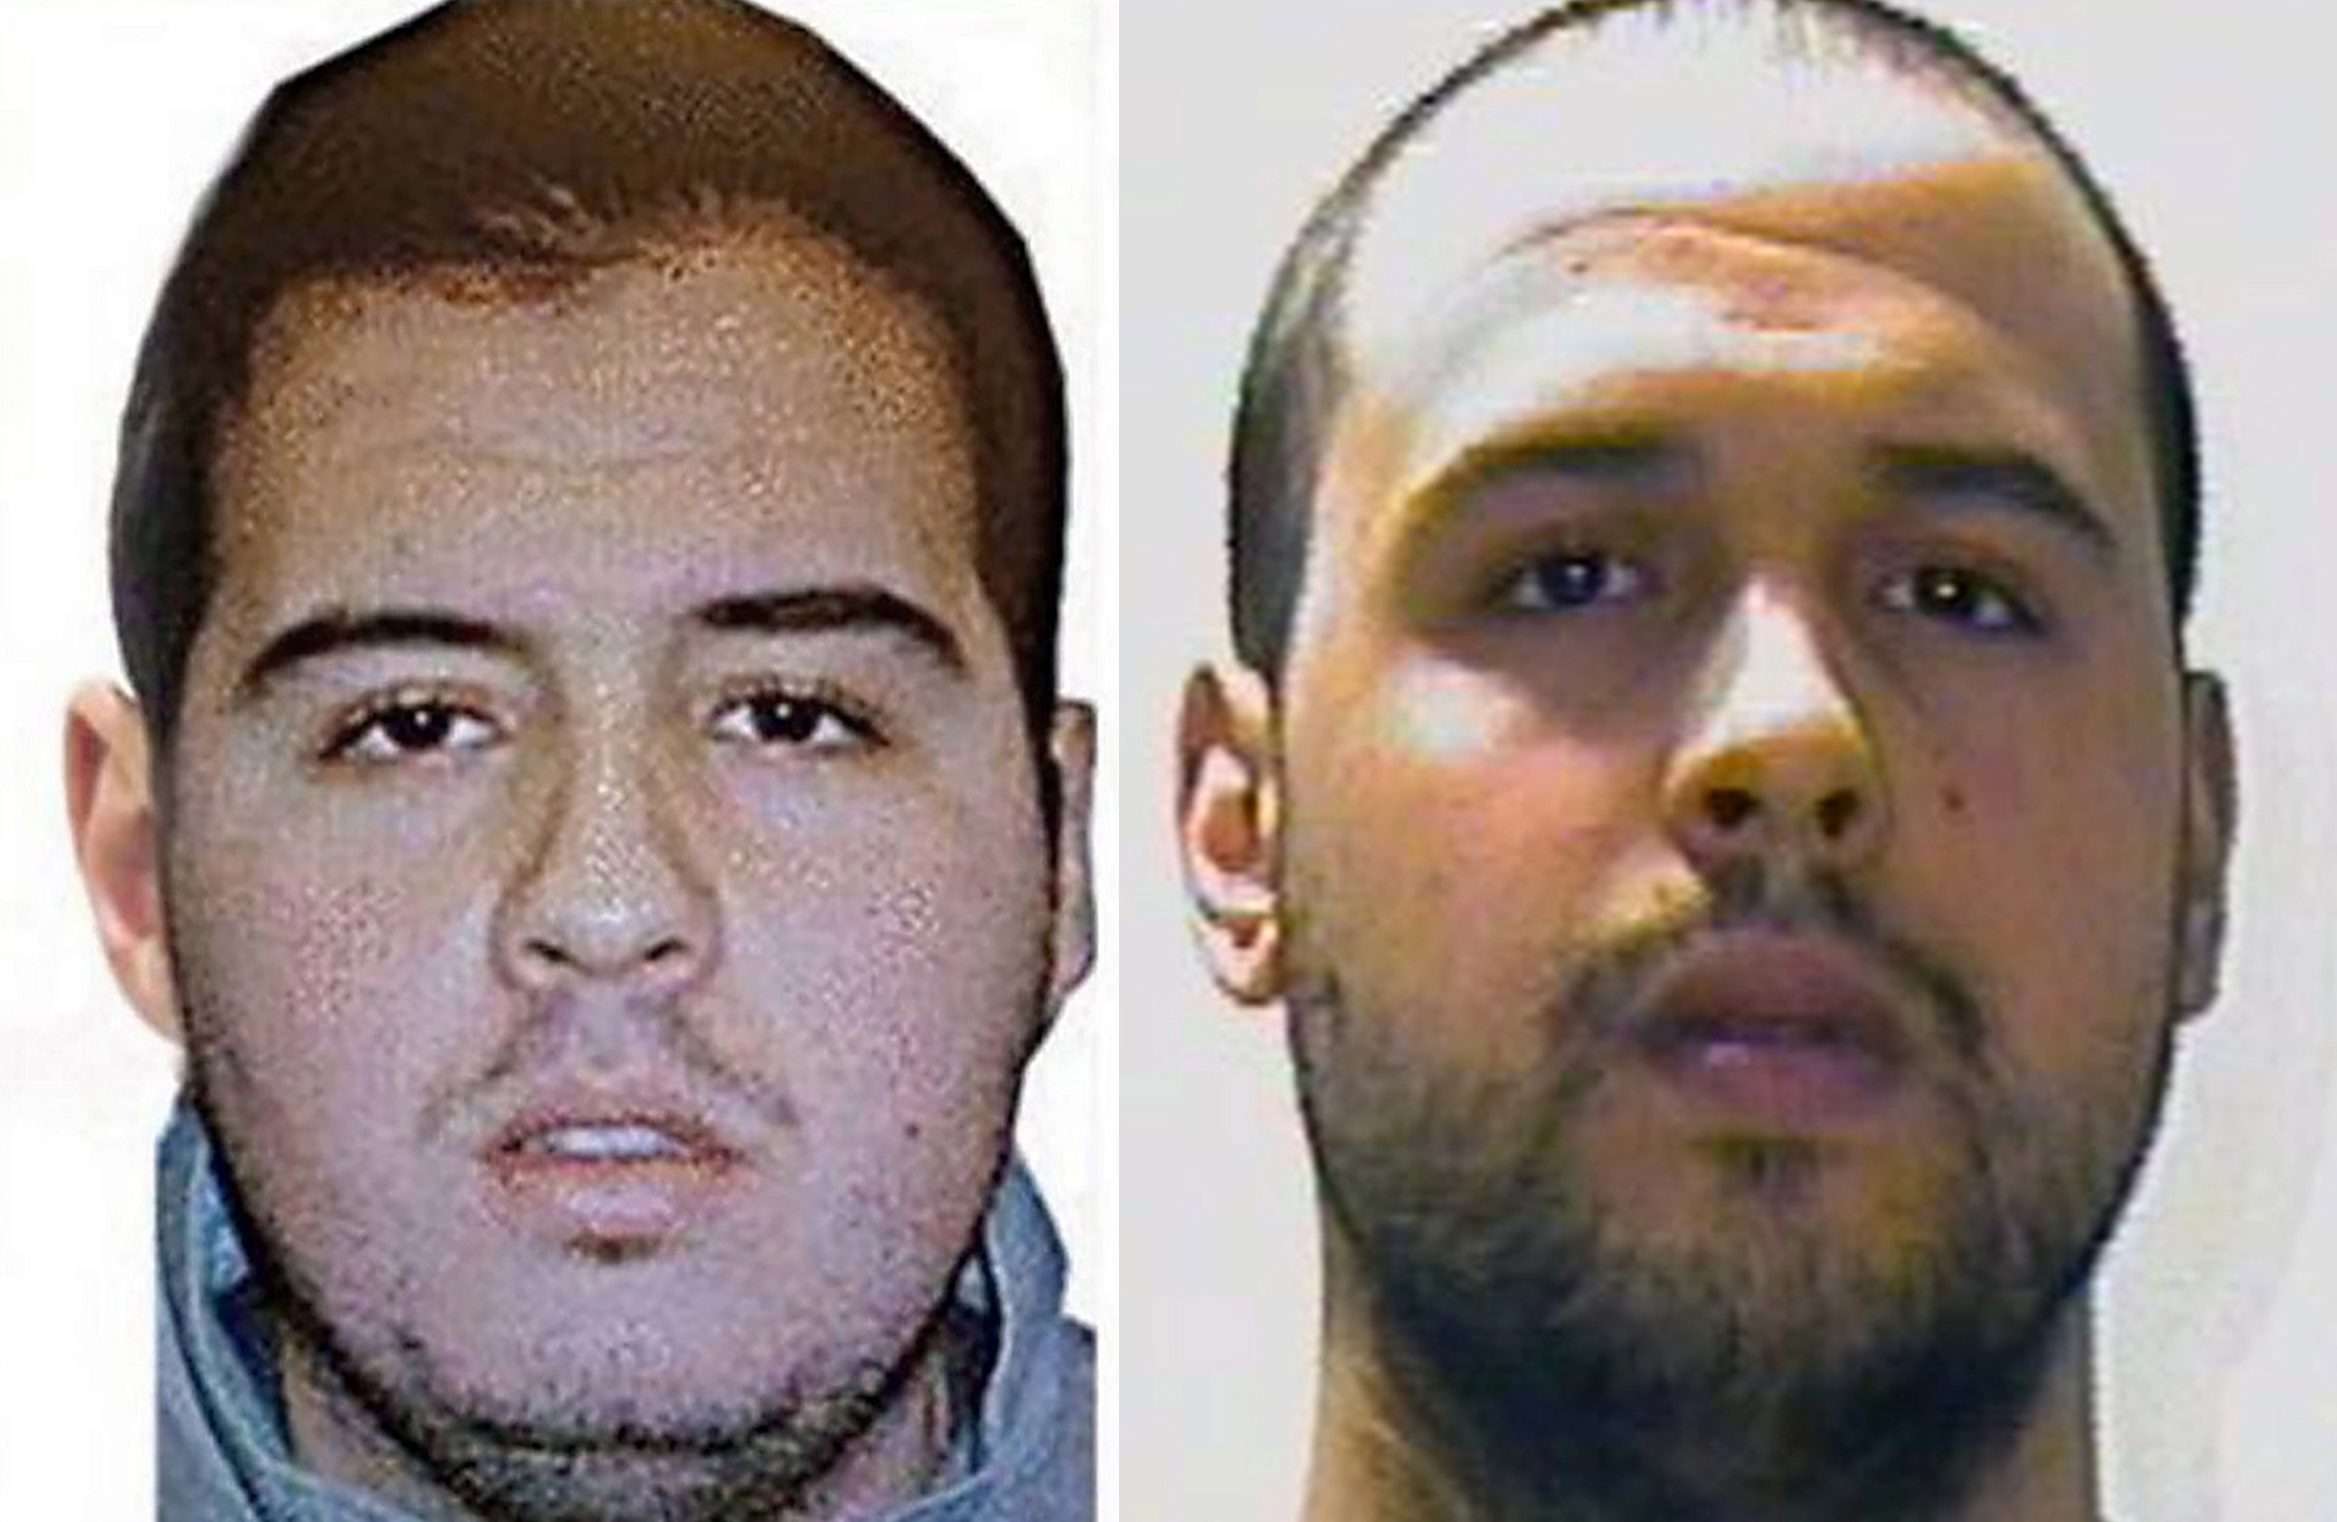 A composite picture provided by Interpol shows Ibrahim El Bakraoui (left) and brother Khalid El Bakraoui who blew themselves up in the suicide attack on Brussels airport on March 22. Ibrahim El Bakraoui had written messages that he felt “hunted from everywhere” prior to the attacks, Belgian investigators said. Photo: EPA